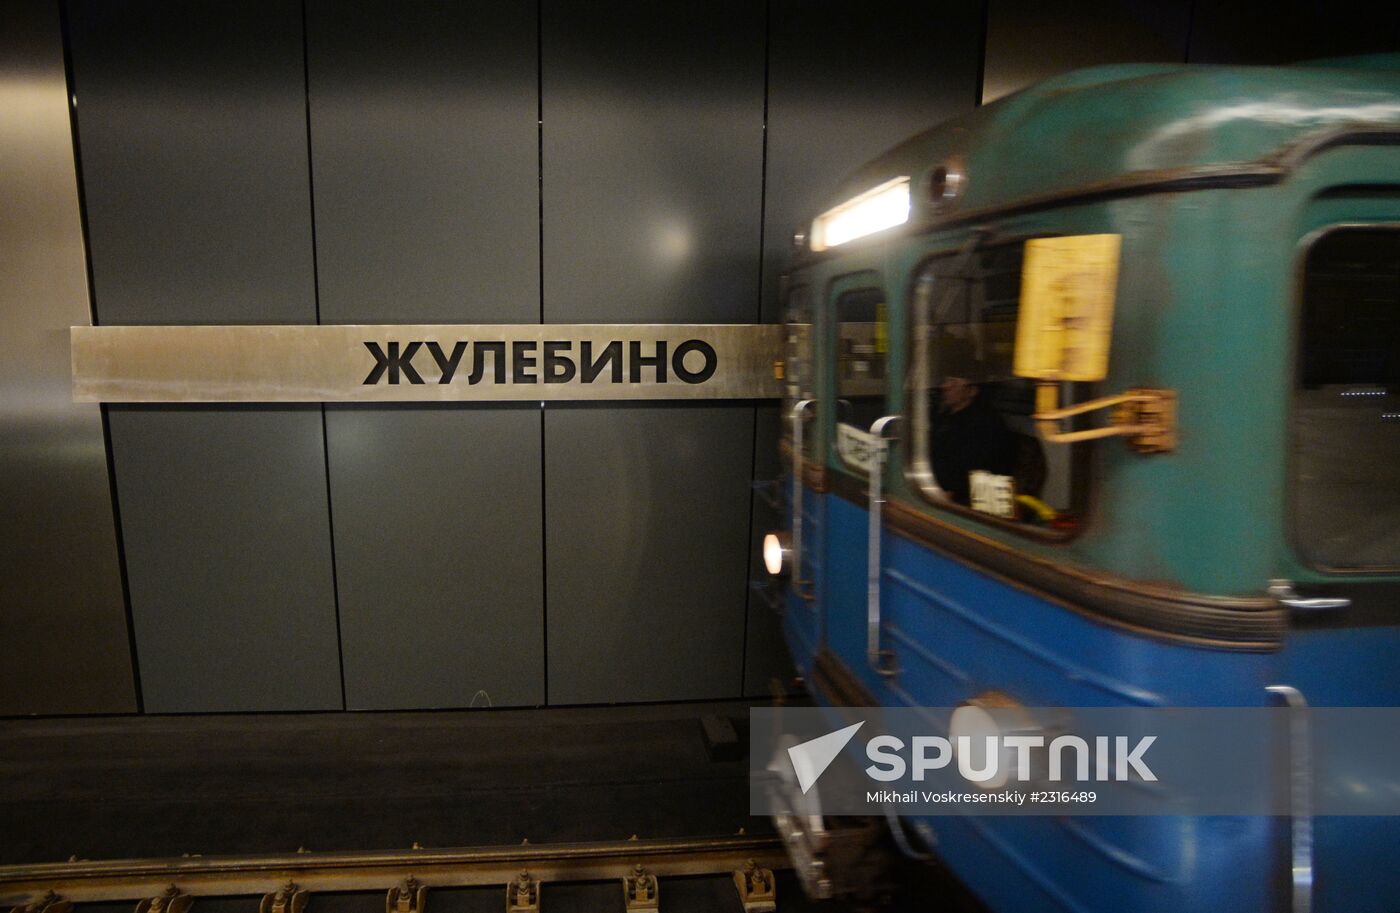 Zhulebino and Lermontovsky Prospekt metro stations open in Moscow